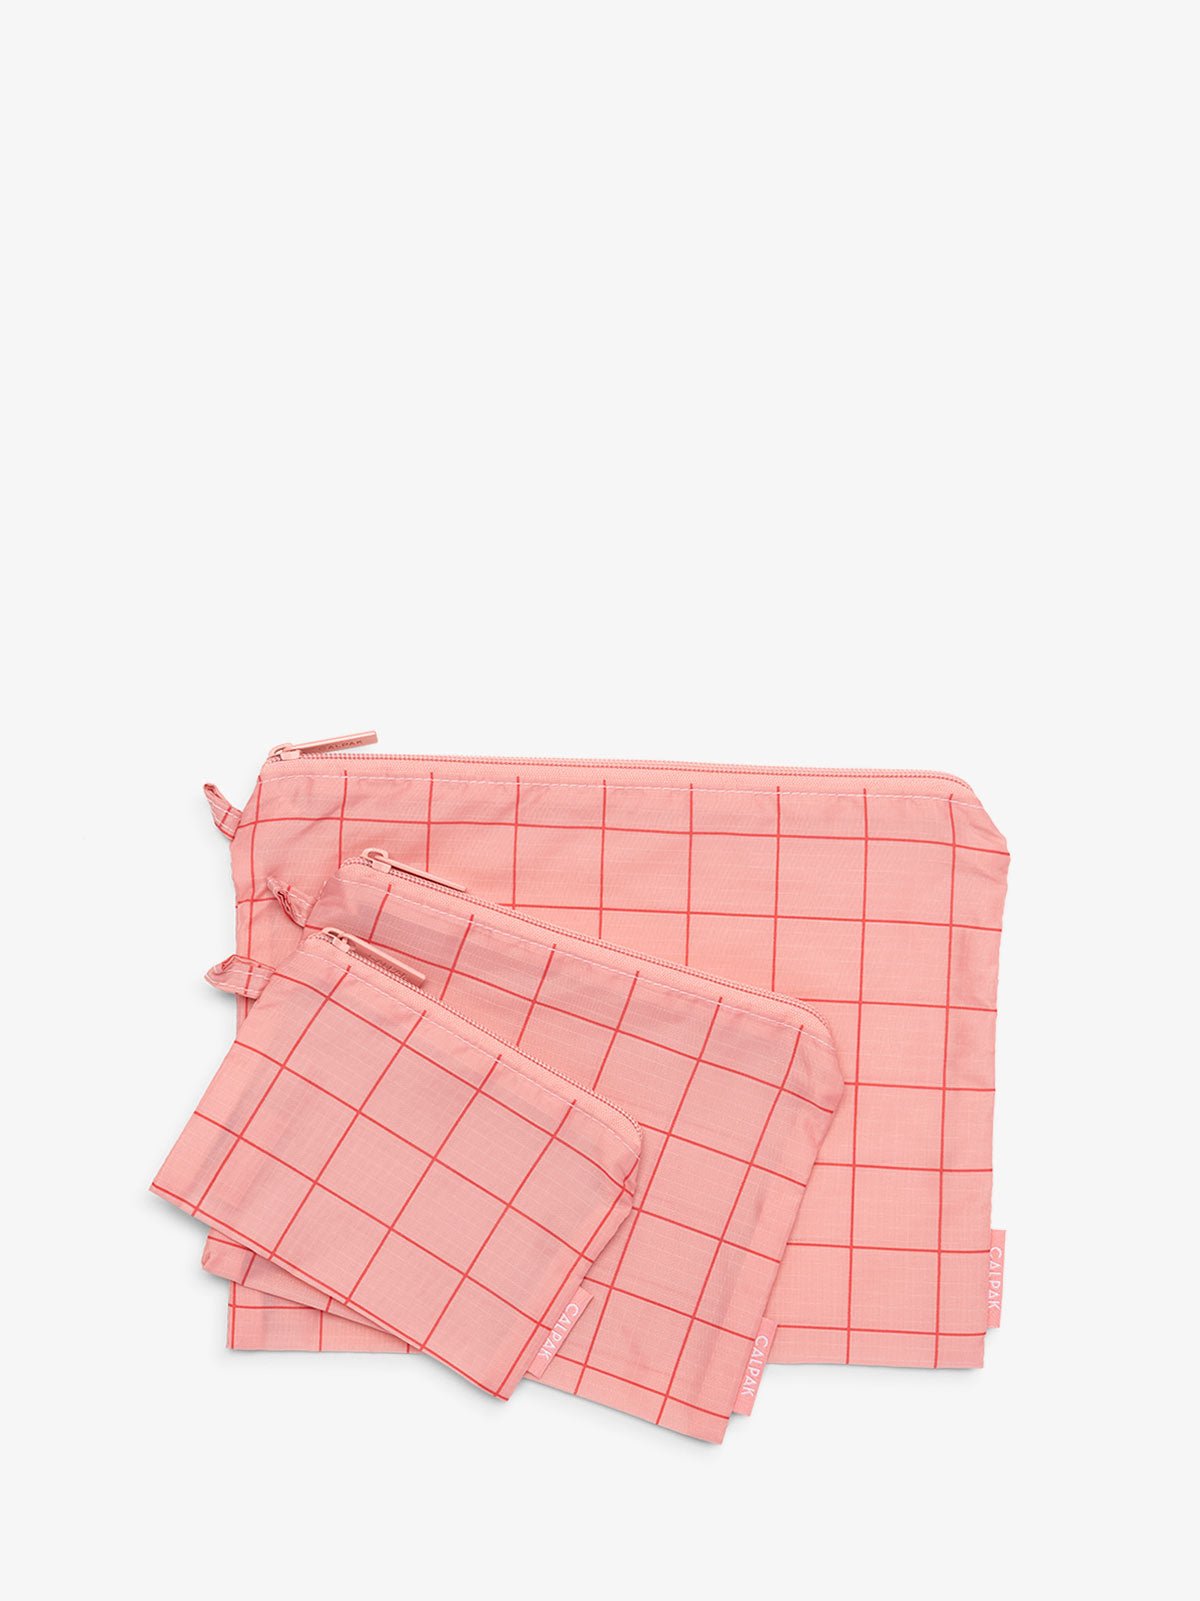 CALPAK Compakt zippered pouches in pink grid